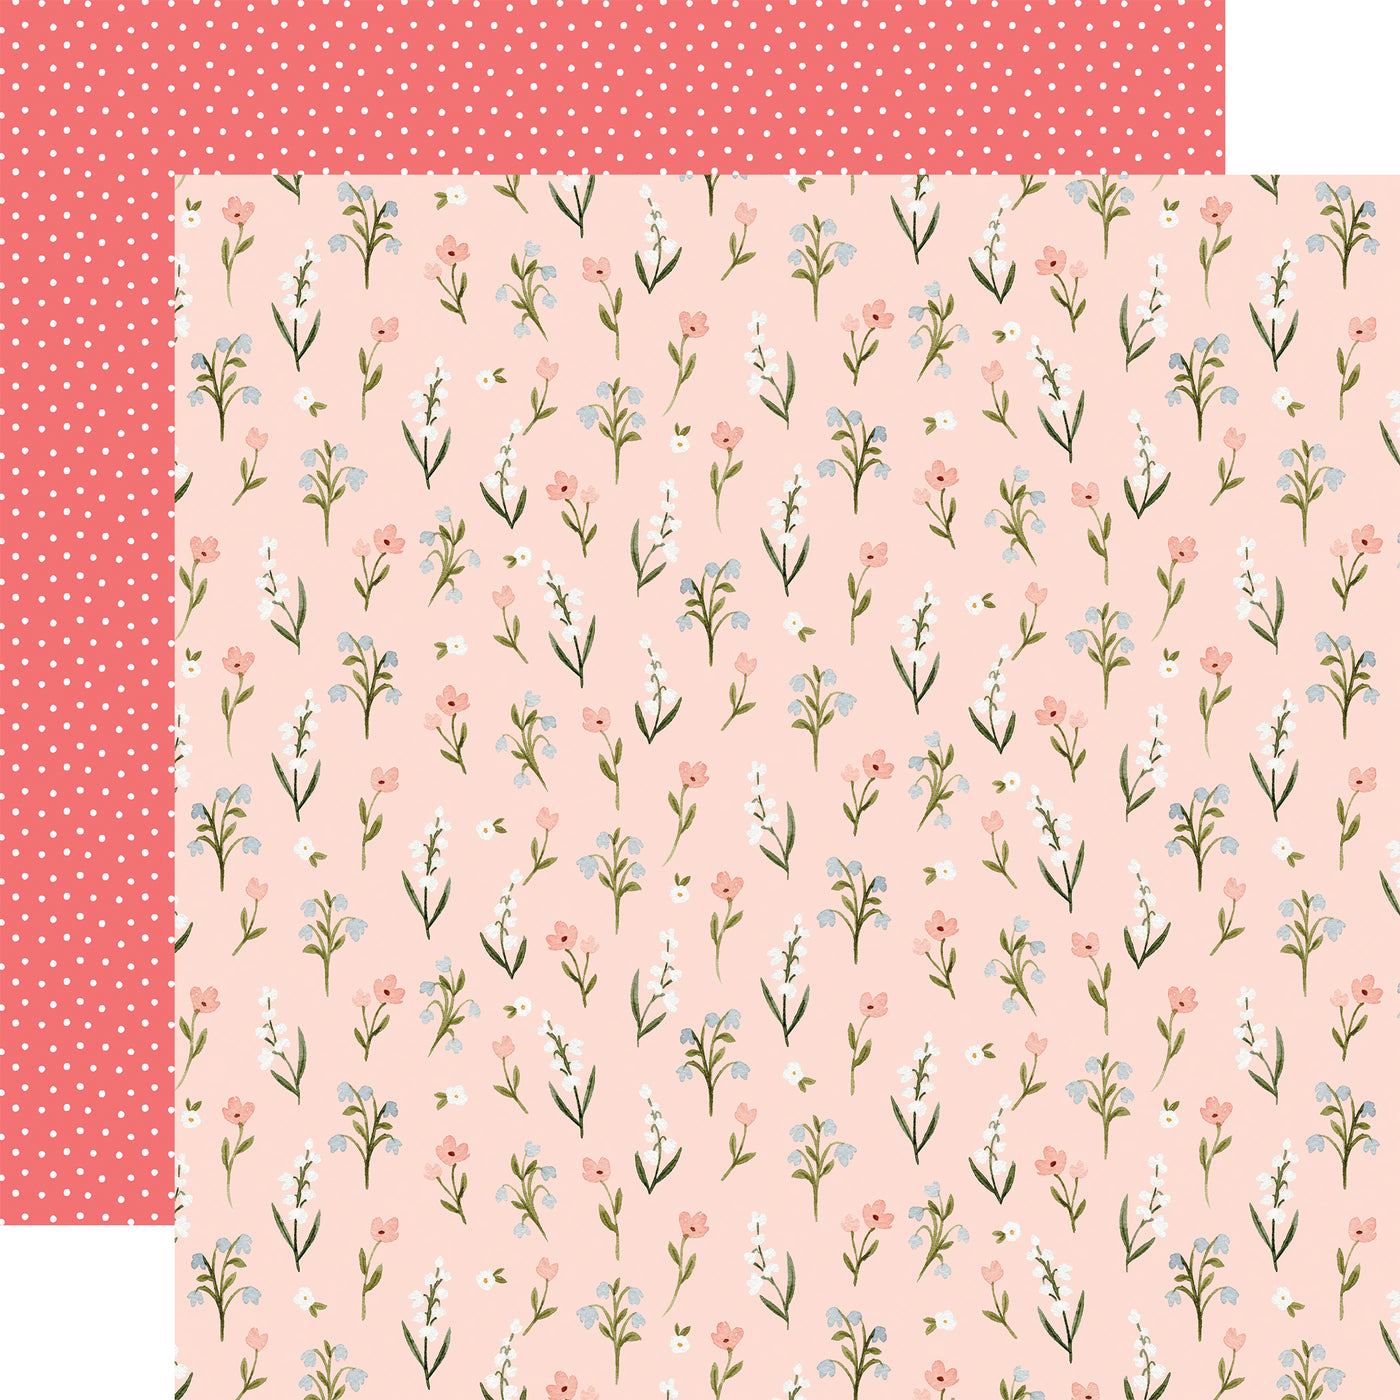 The front side of this paper has a beautiful floral pattern in shades of pink, white, and periwinkle. The reverse side is pink with a dotted pattern. 